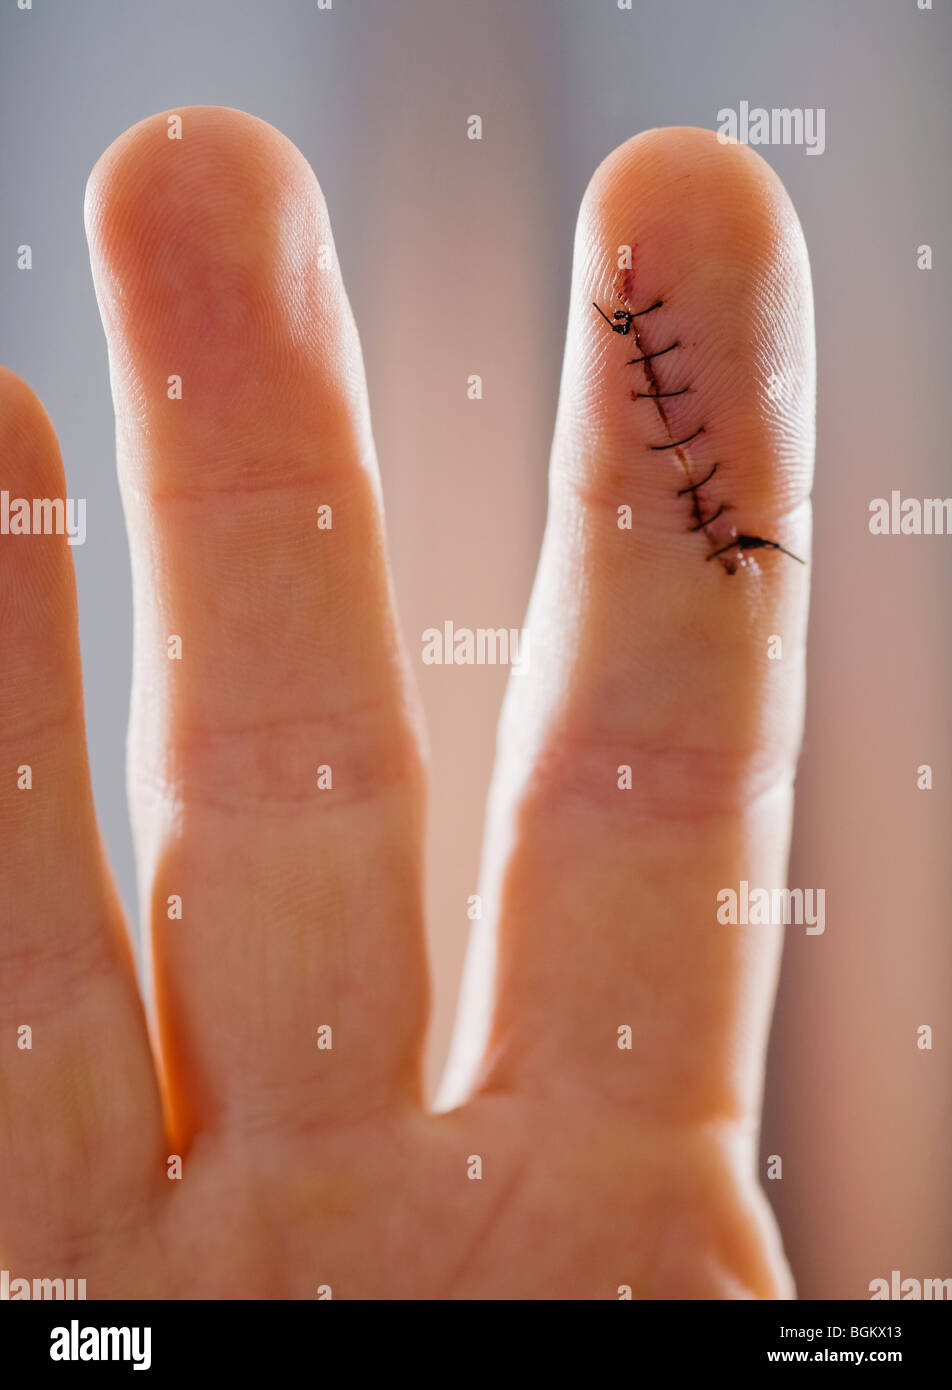 Closeup of an index finger with a stitched up cut. Stock Photo